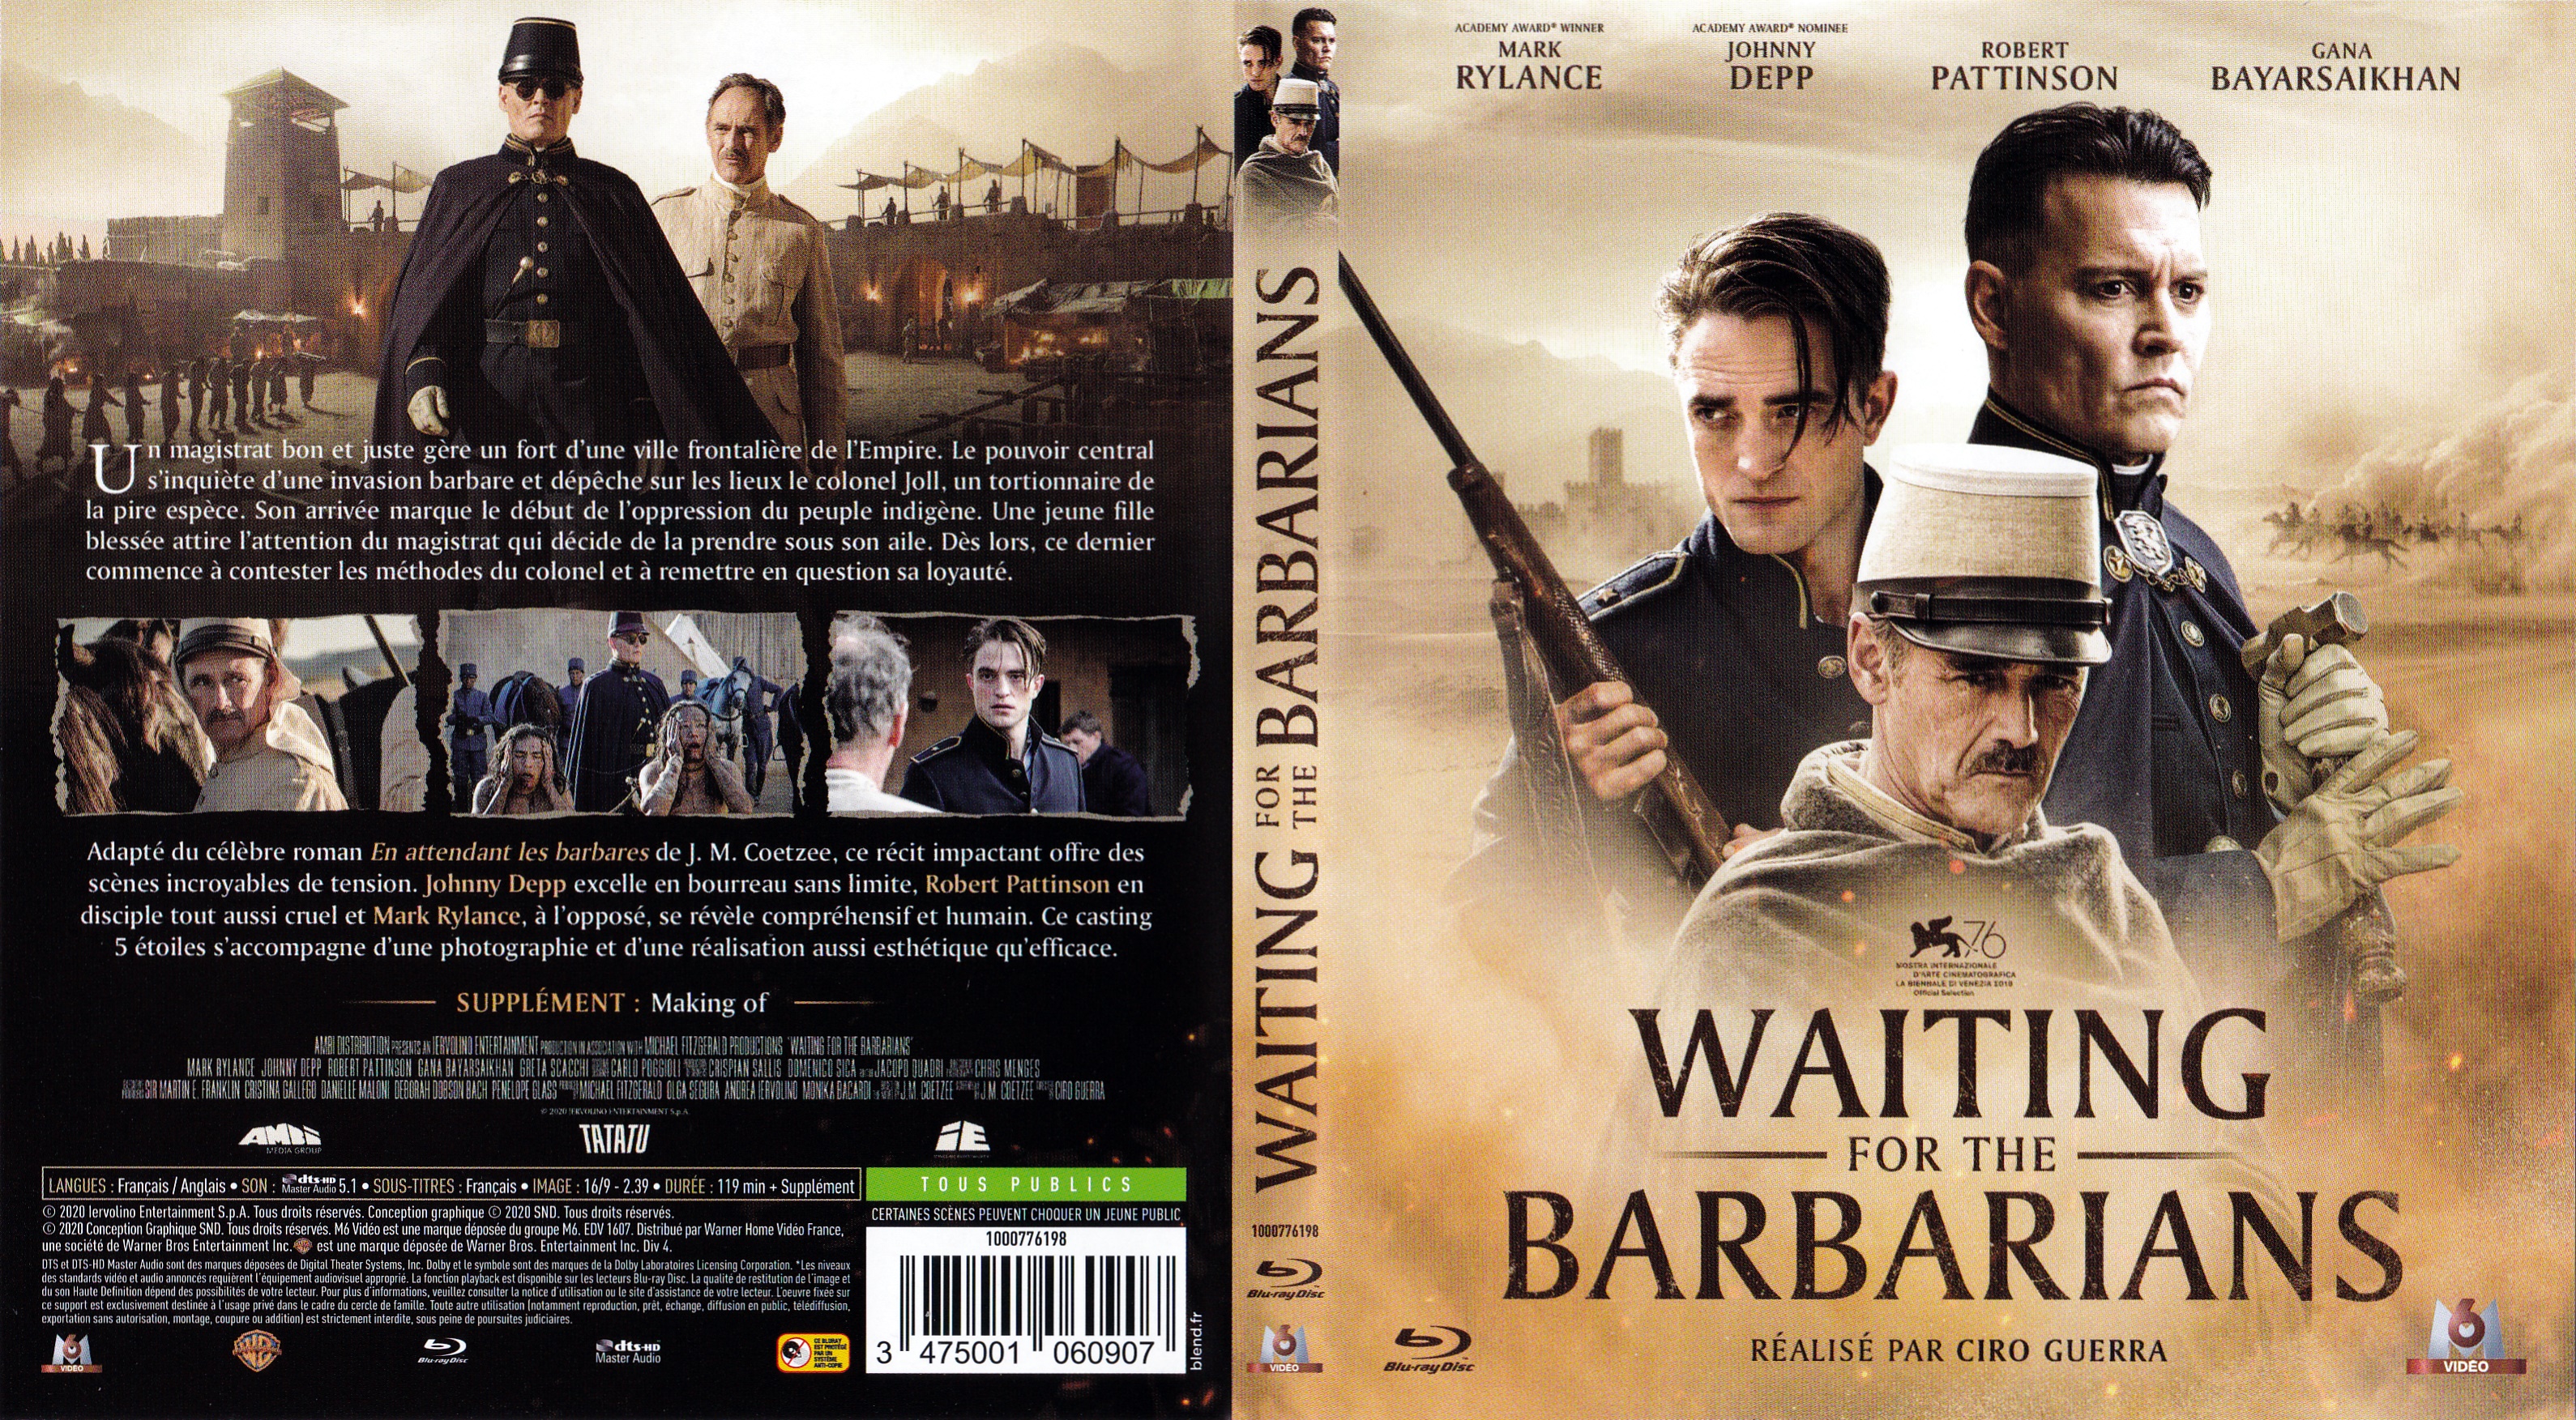 Jaquette DVD Waiting for the barbarians (BLU-RAY)